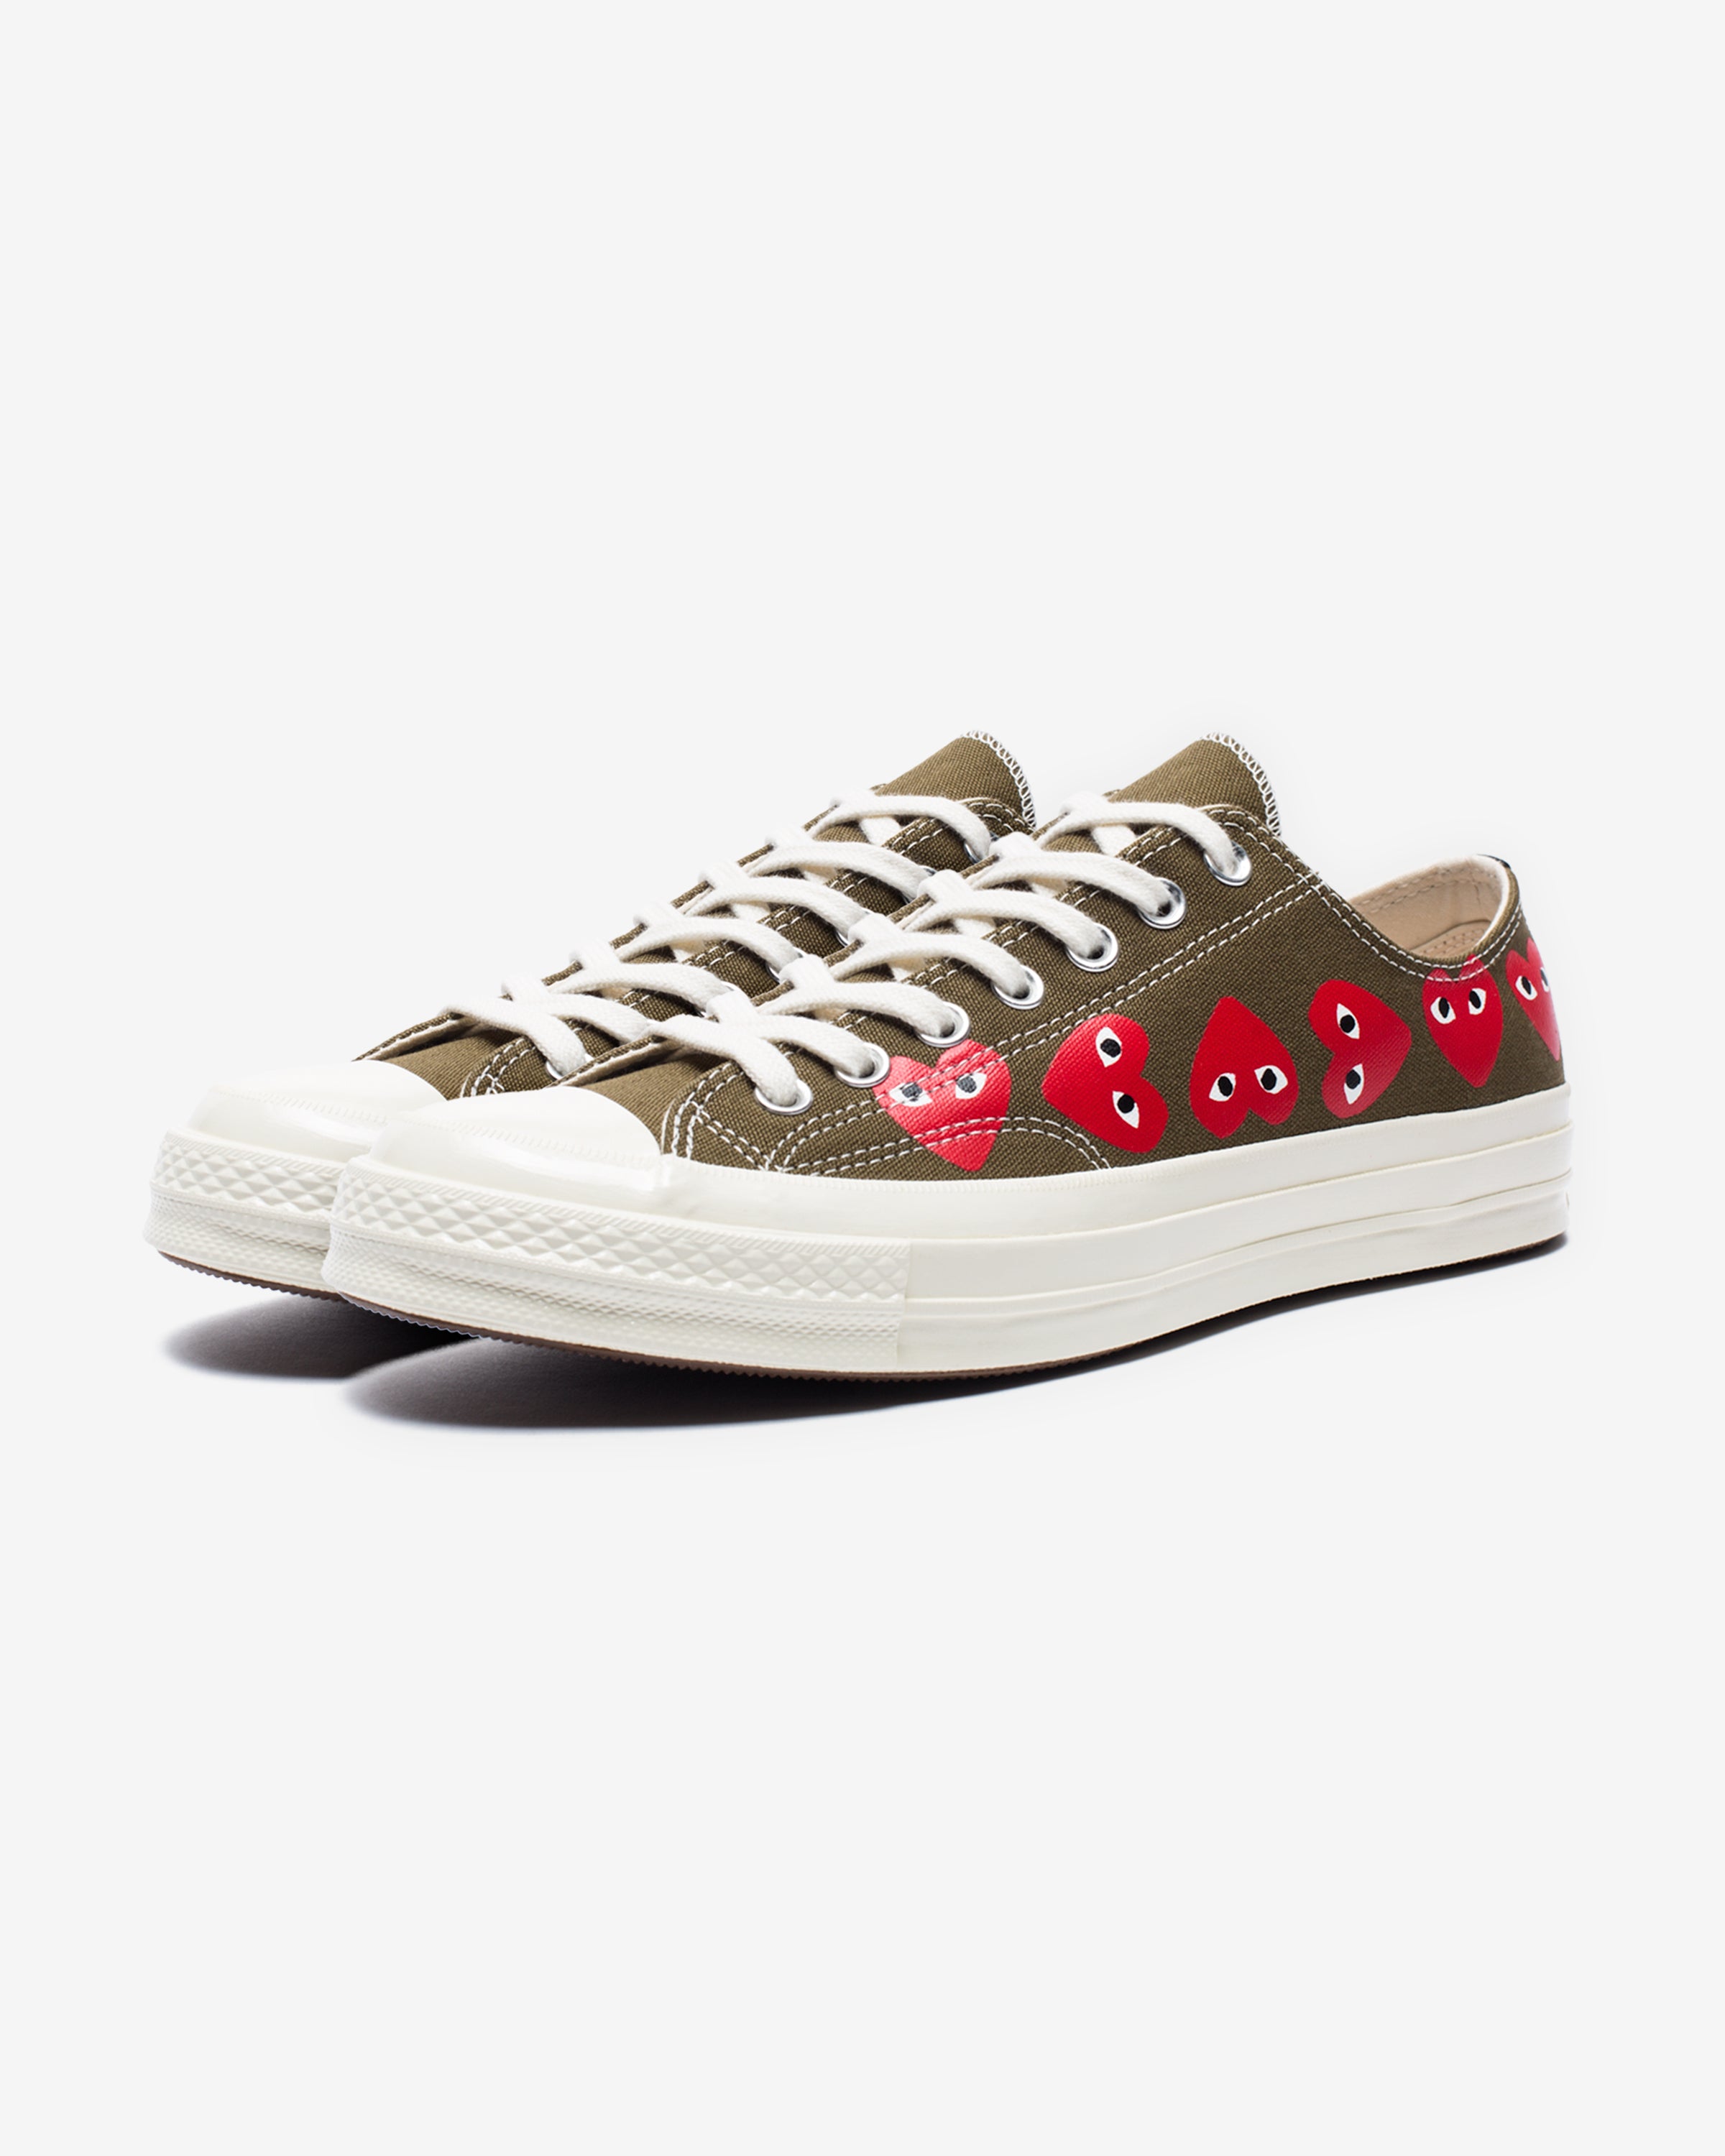 CONVERSE X CDG PLAY MULTI HEART CHUCK TAYLOR ALL STAR '70 Undefeated